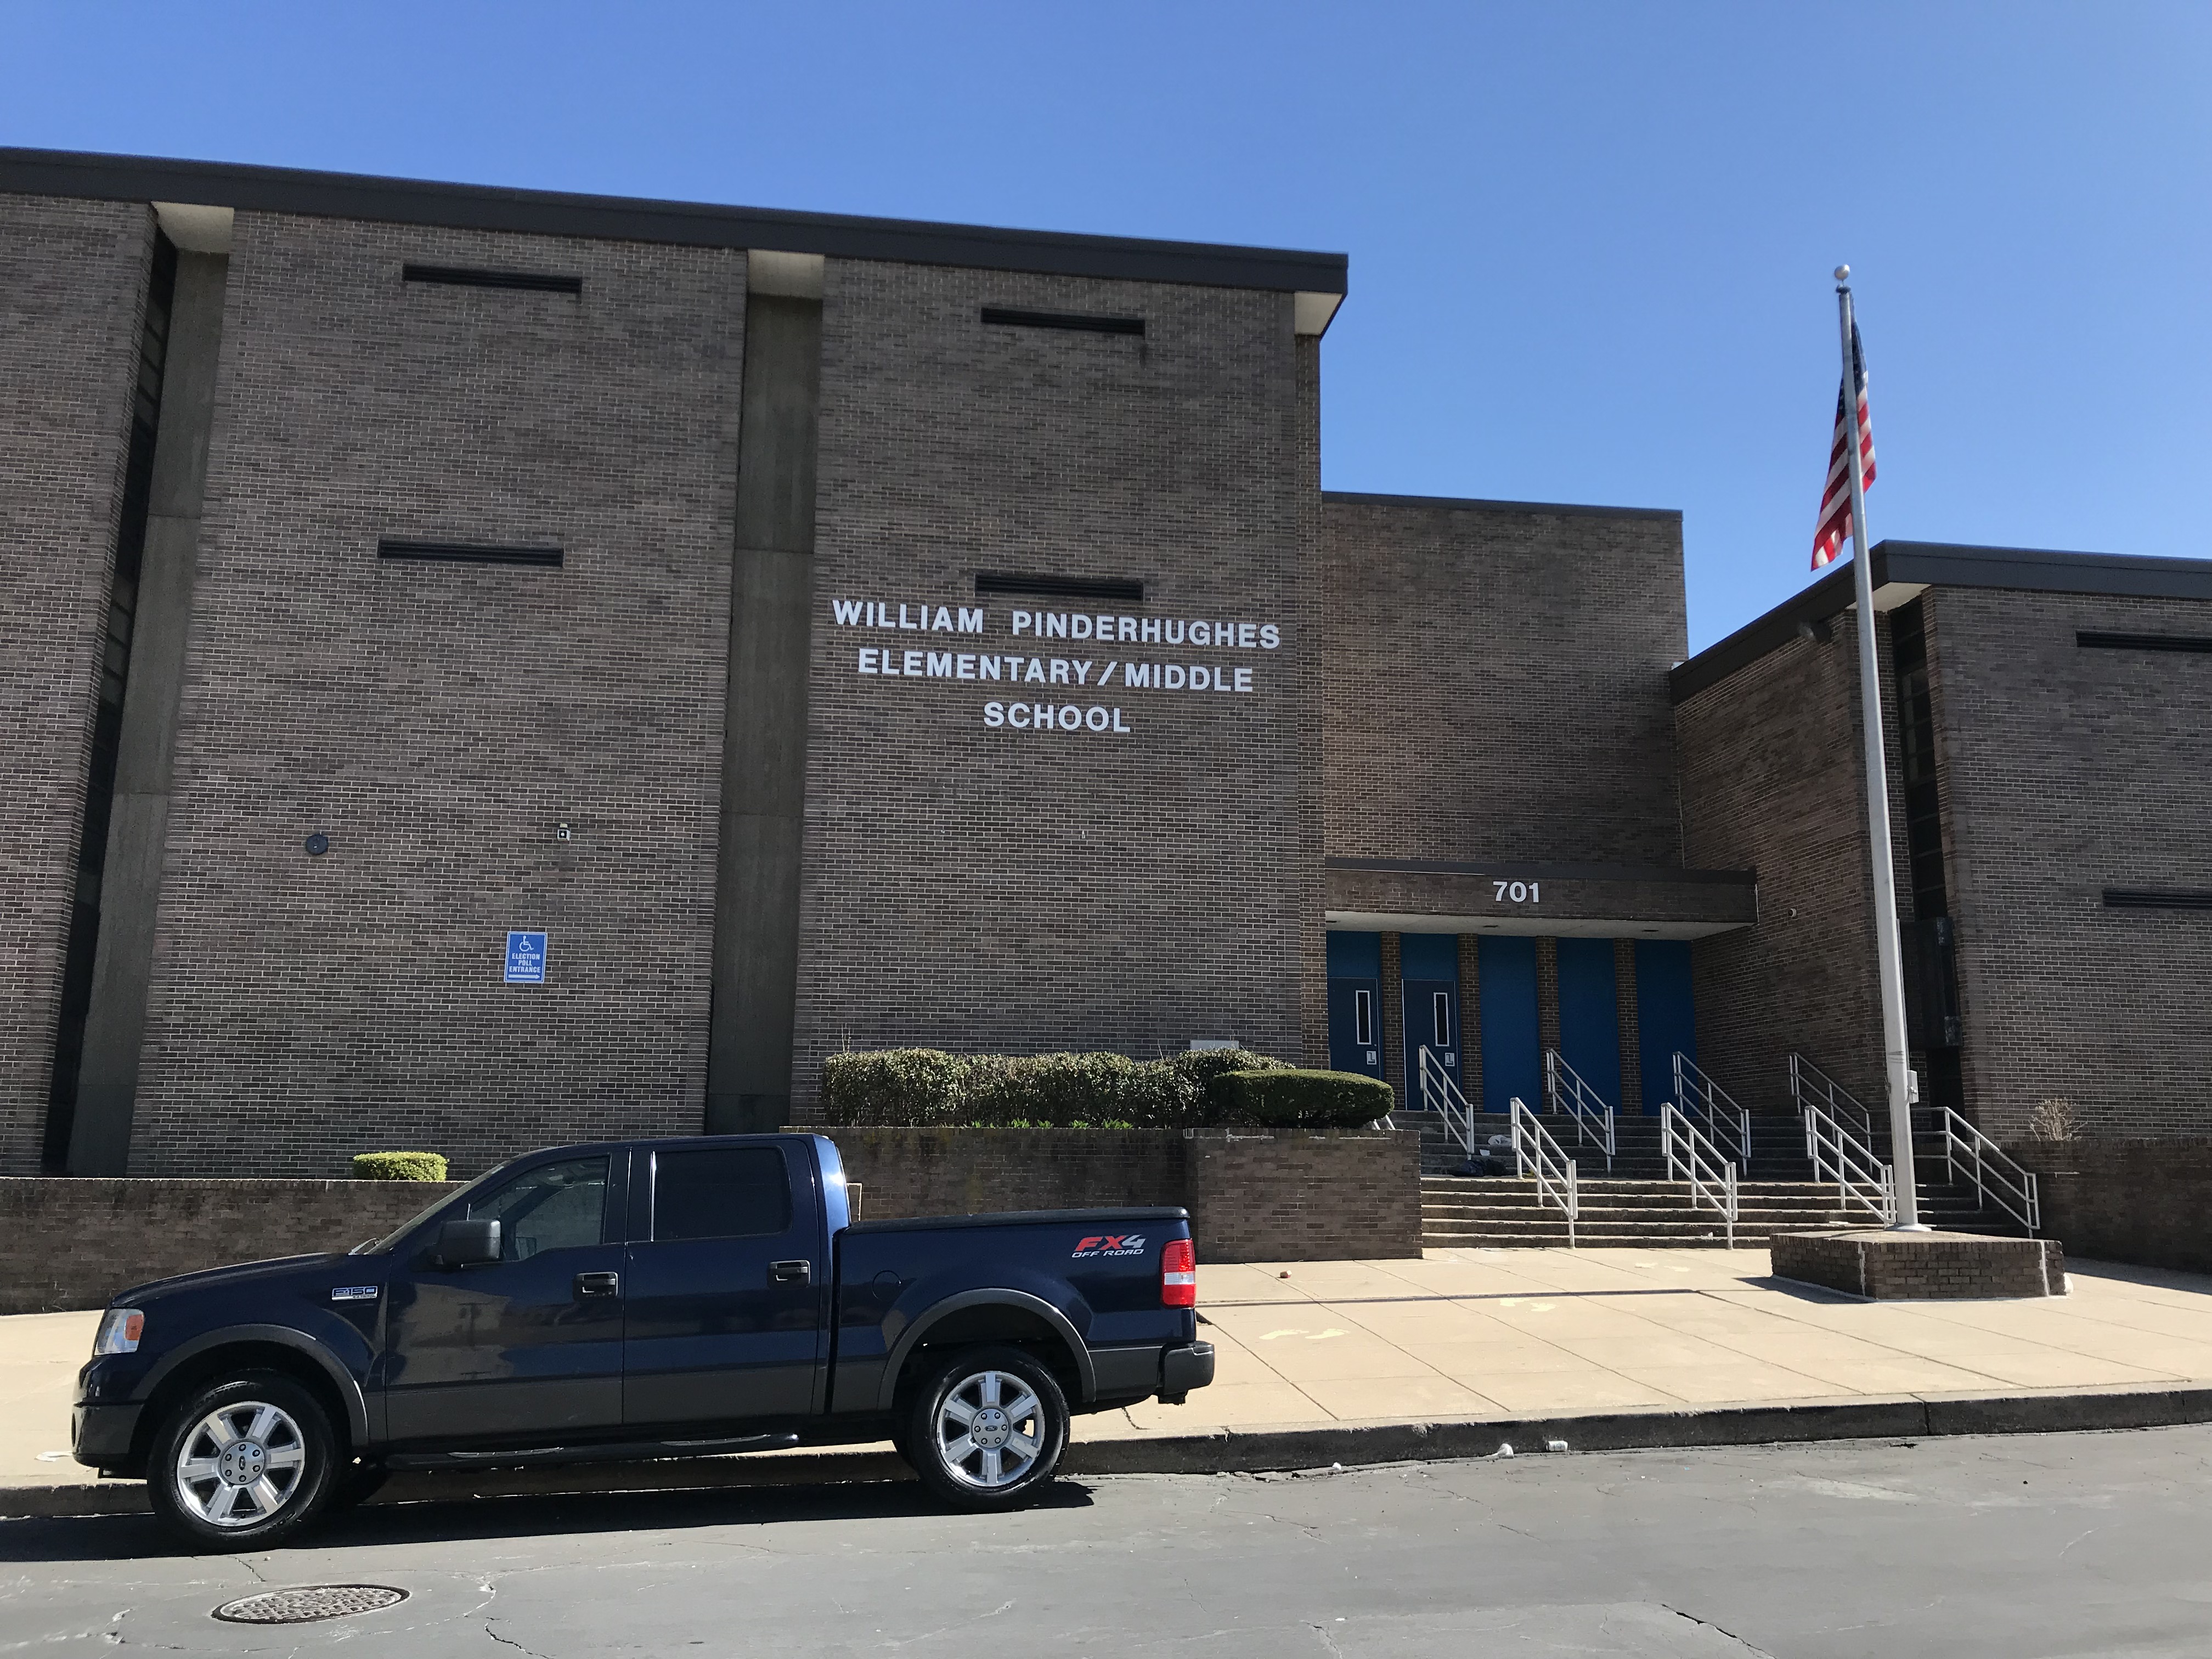 William Pinderhughes Elementary/Middle School, 701 Gold Street, Baltimore, MD 21217, Baltimore, Baltimore City Public Schools, Building, Car, HQ Photo